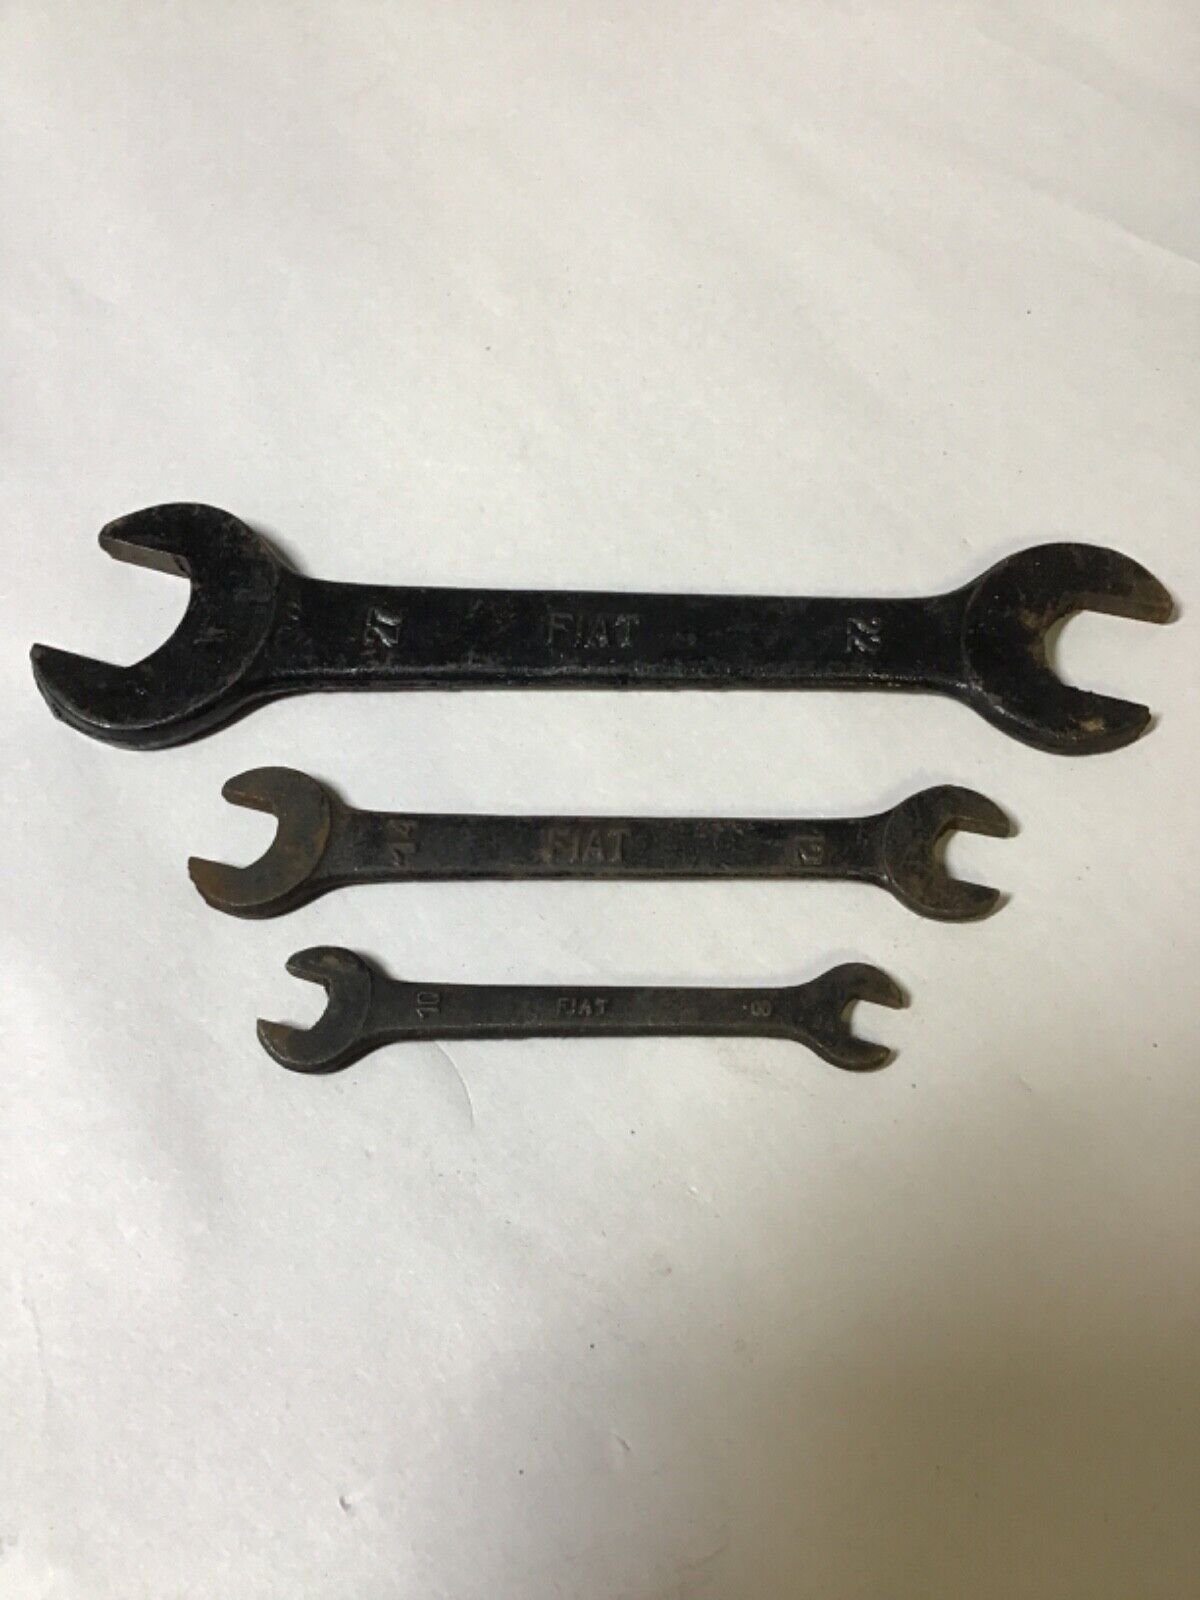 Vintage FIAT Auto Tool Kit Wrench 10mm 27mm 14mm lot 12mm 22mm 8mm